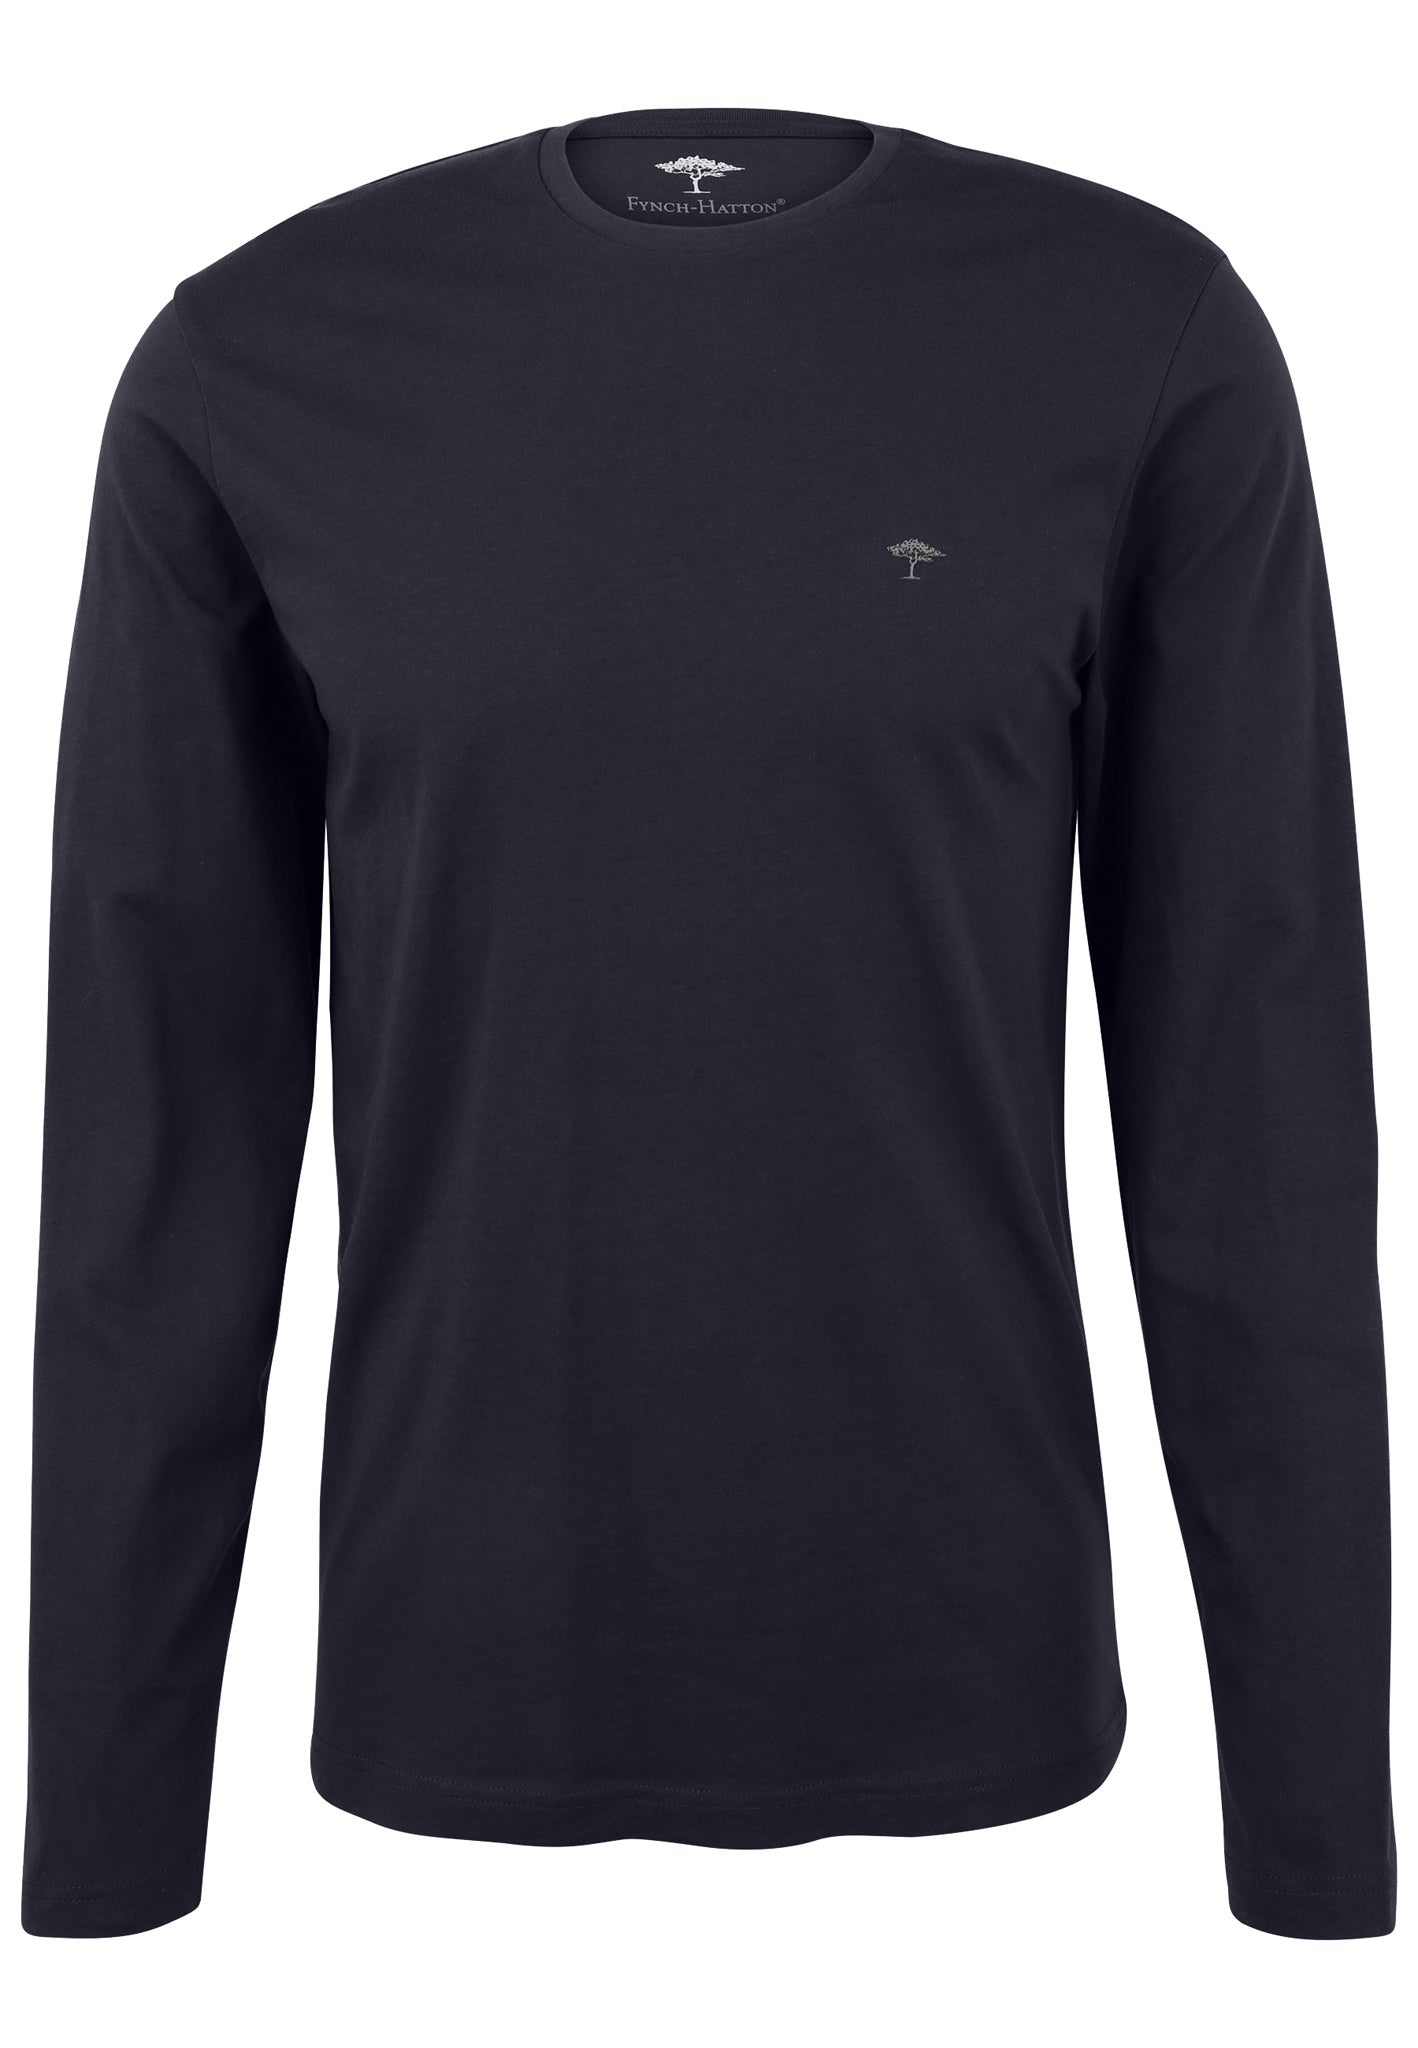 Fynch Hatton Pure Cotton Crew Neck Long-Sleeved Shirt, T-shirt in regular Classic fit.   Chosen in a navy colour. ( 1221  1510 685)